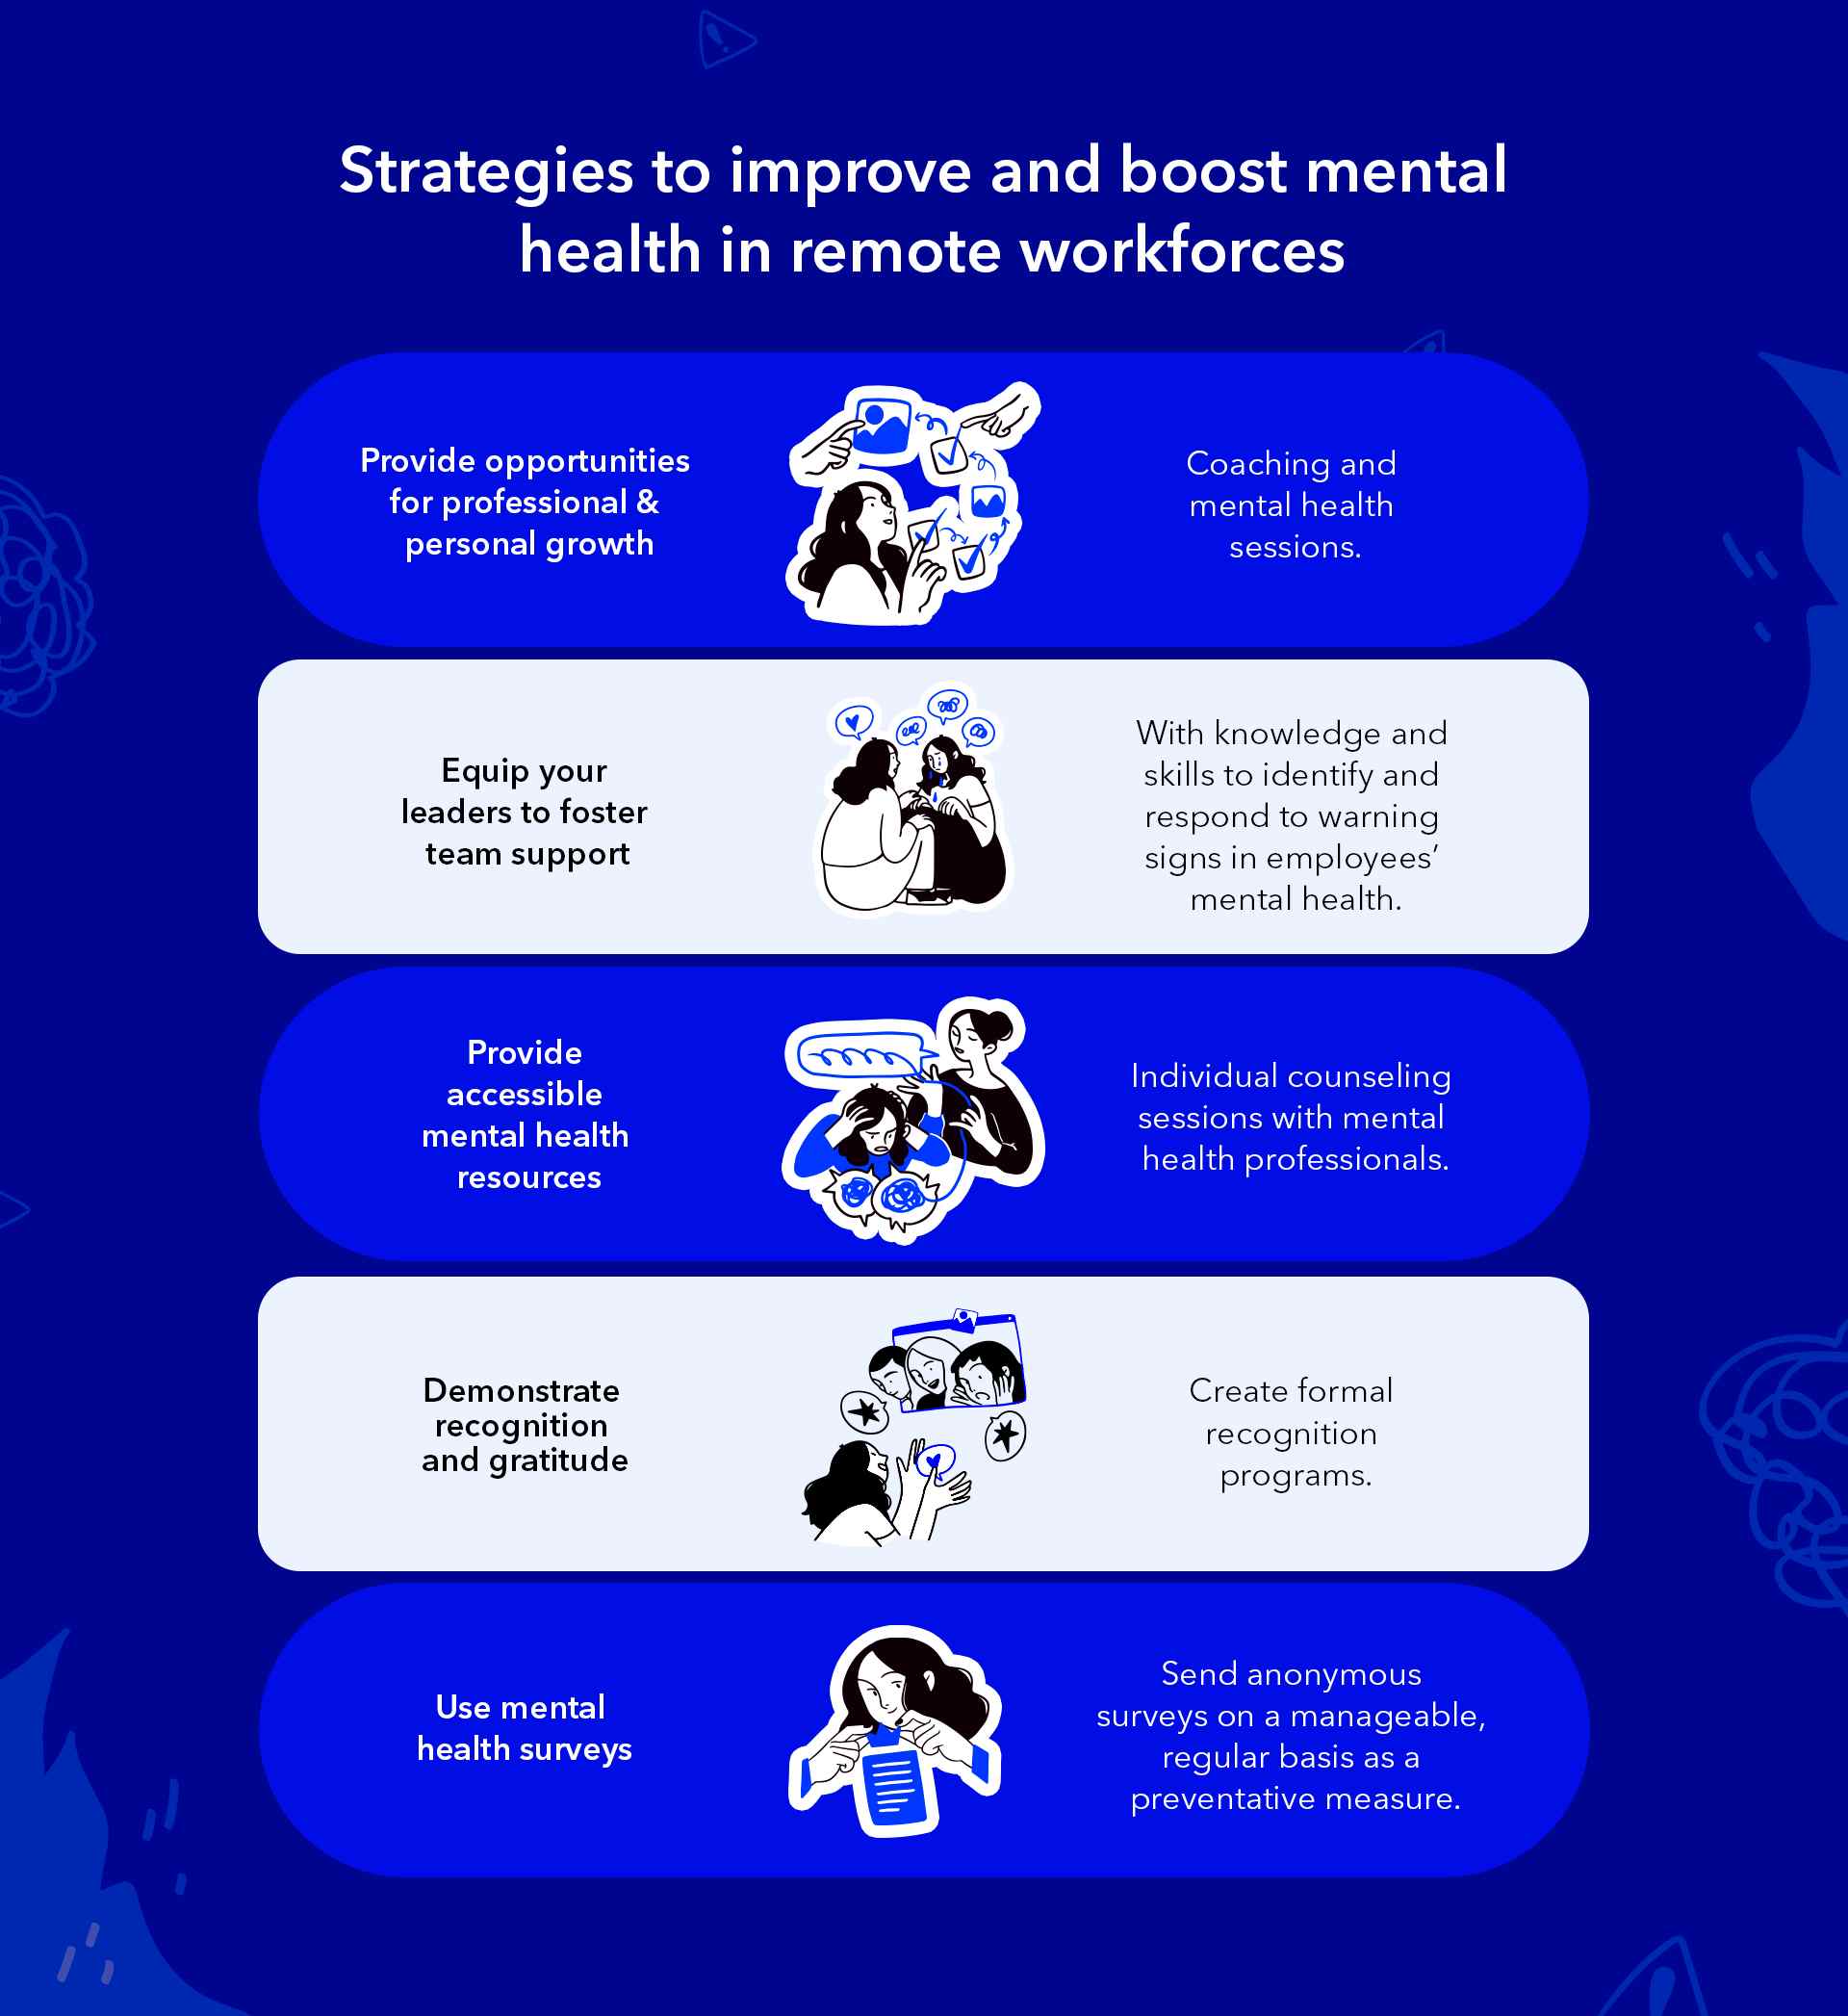 Strategies to improve and boost mental health in remote workforces